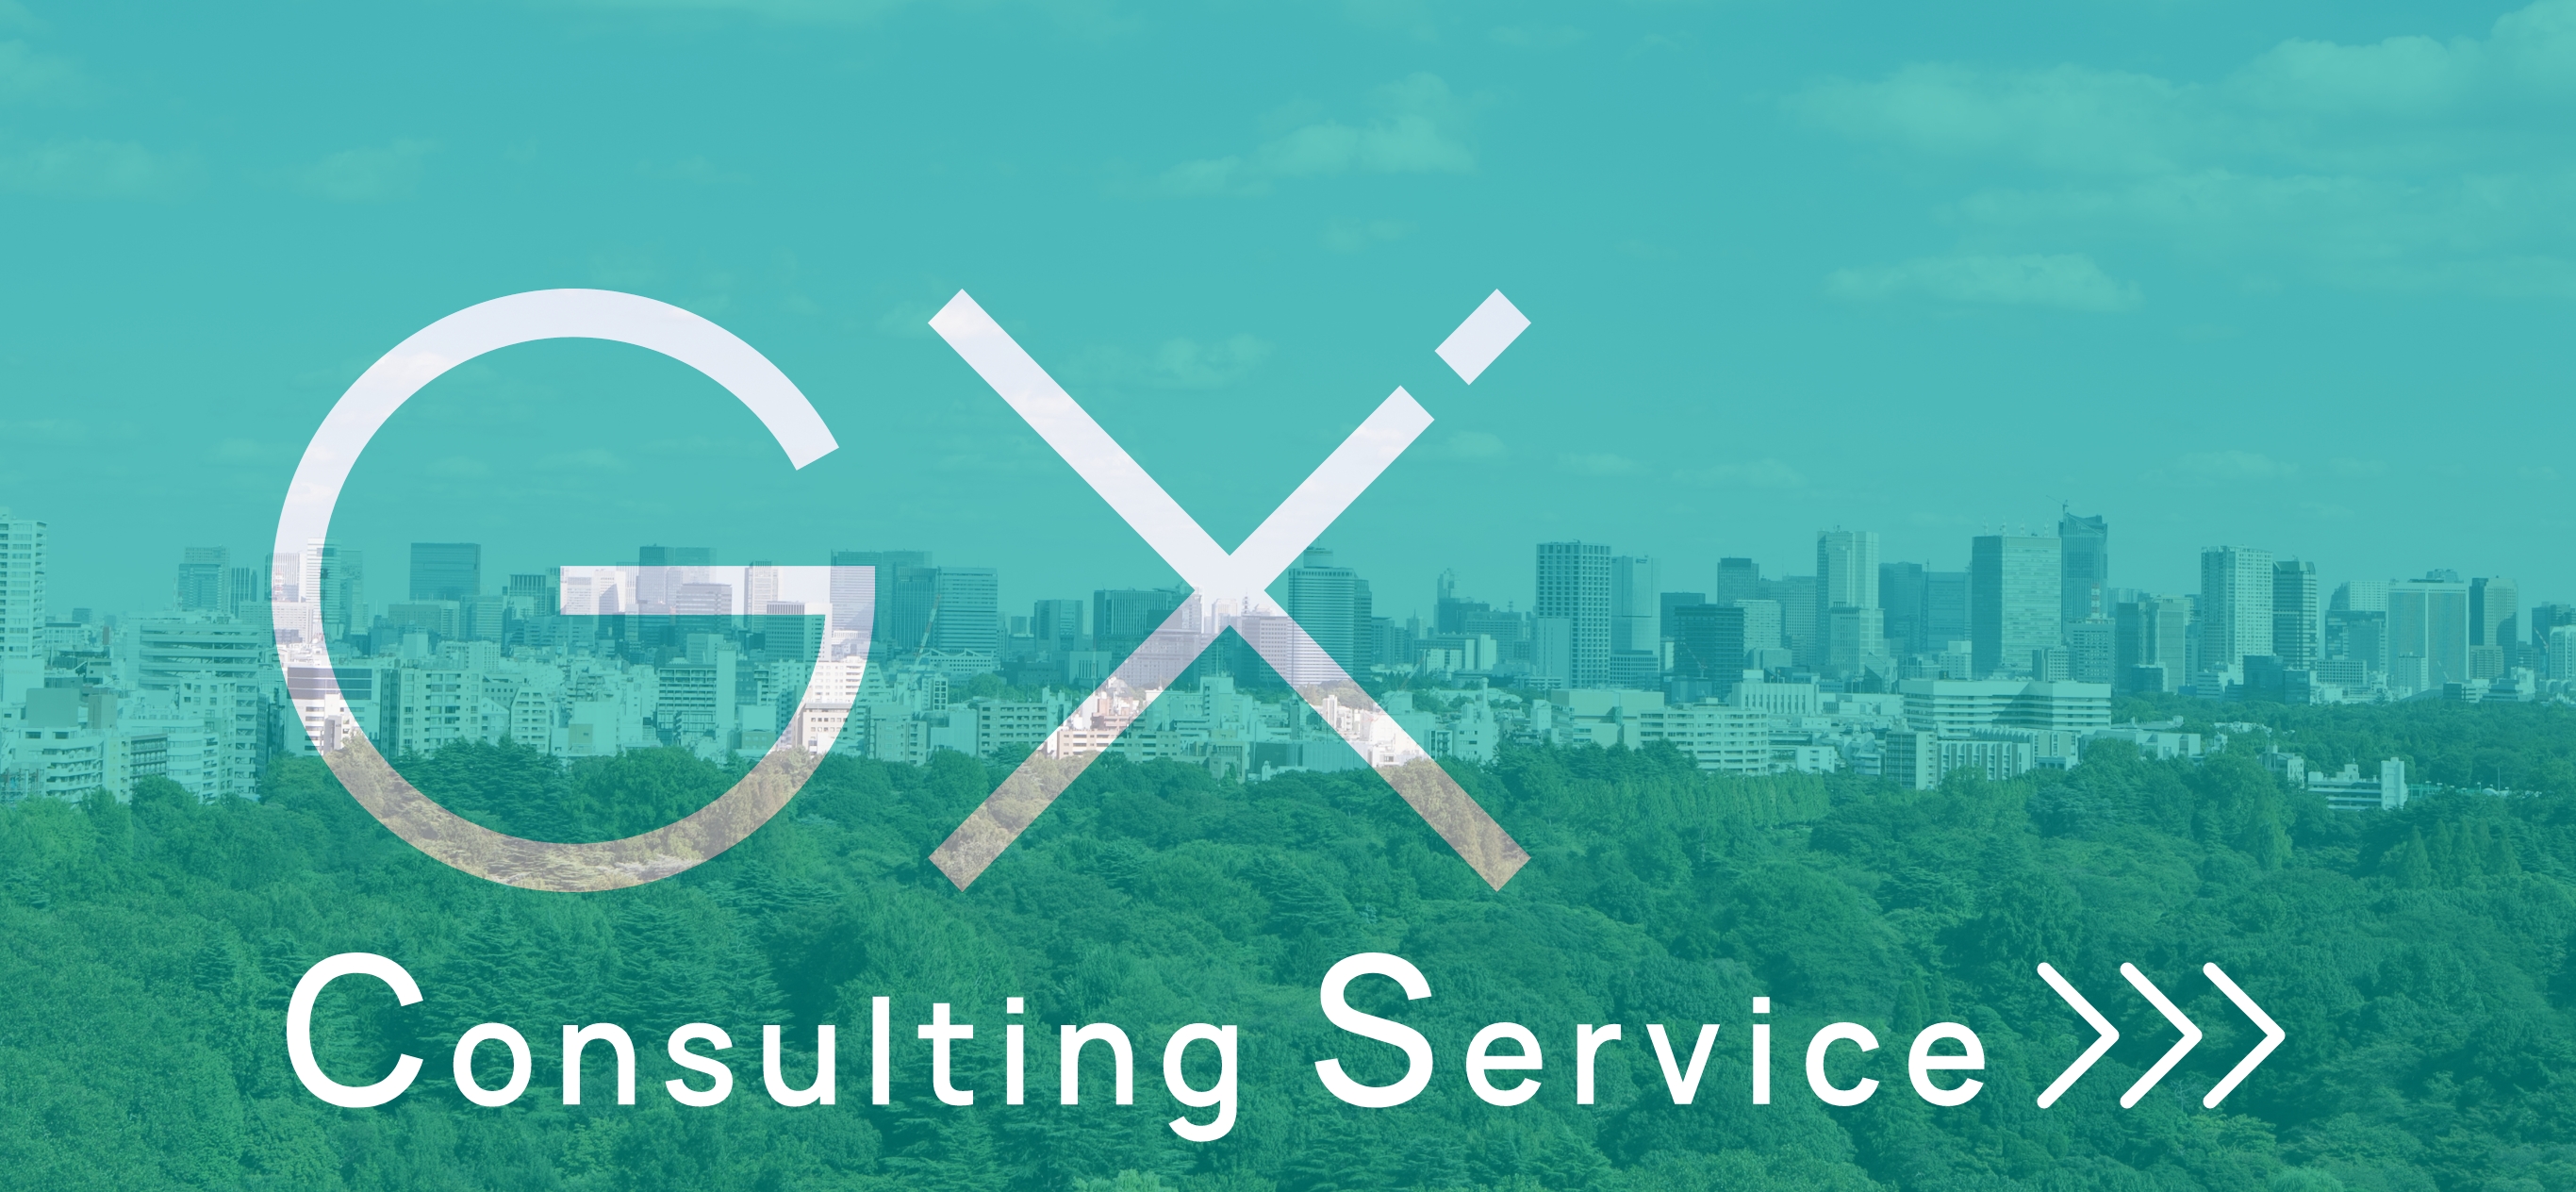 GX Consulting Service